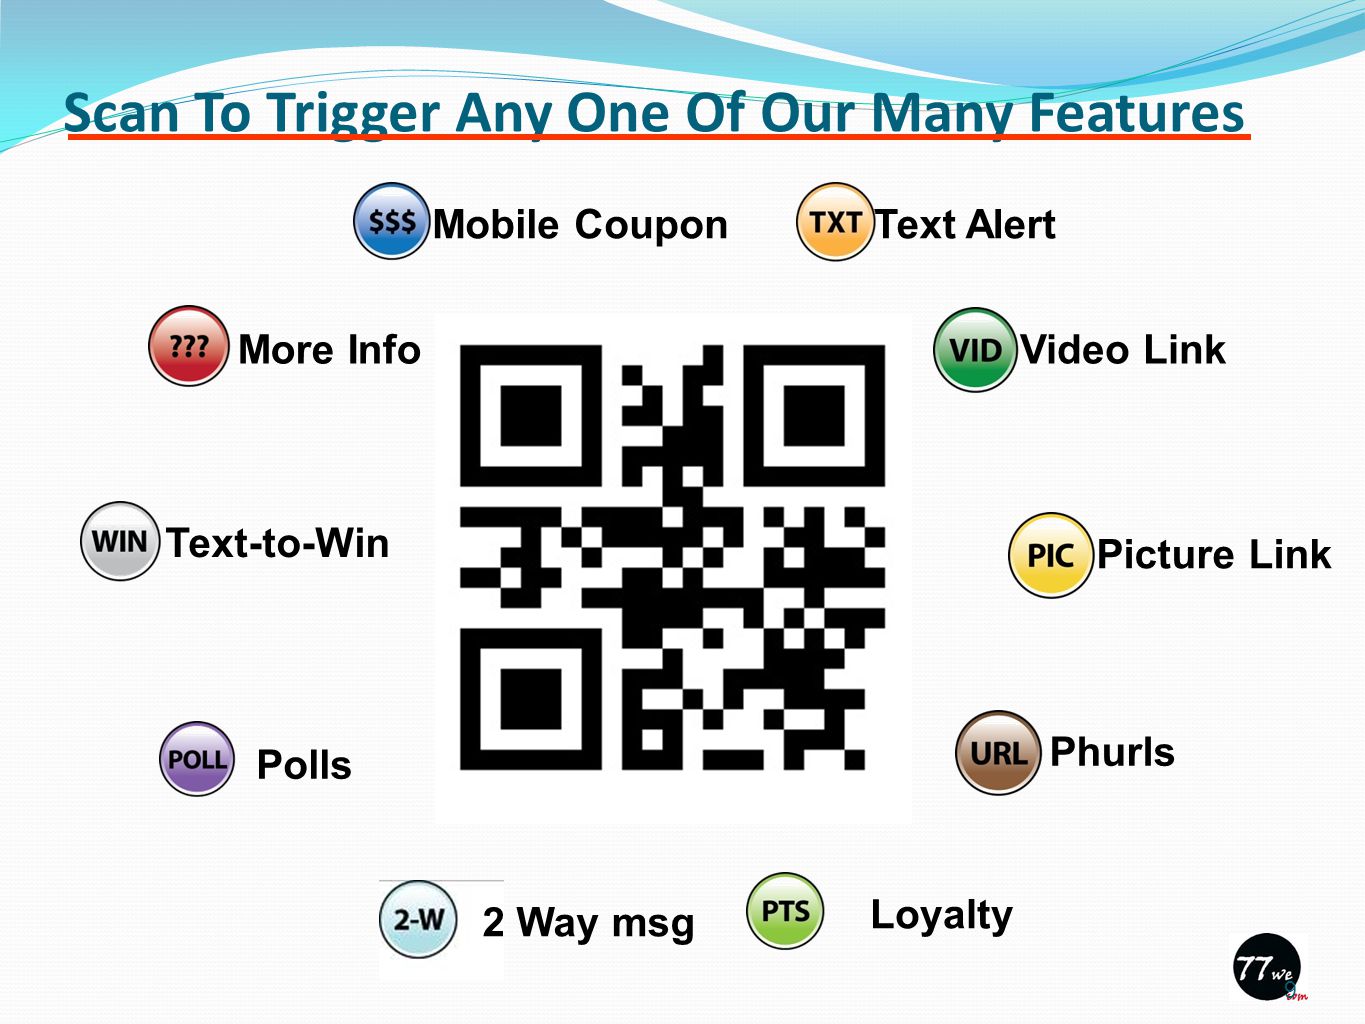 Scan To Trigger Any One Of Our Many Features Polls Text-to-Win More Info Mobile Coupon Text Alert Video Link Picture LinkPhurls Loyalty 2 Way msg 9